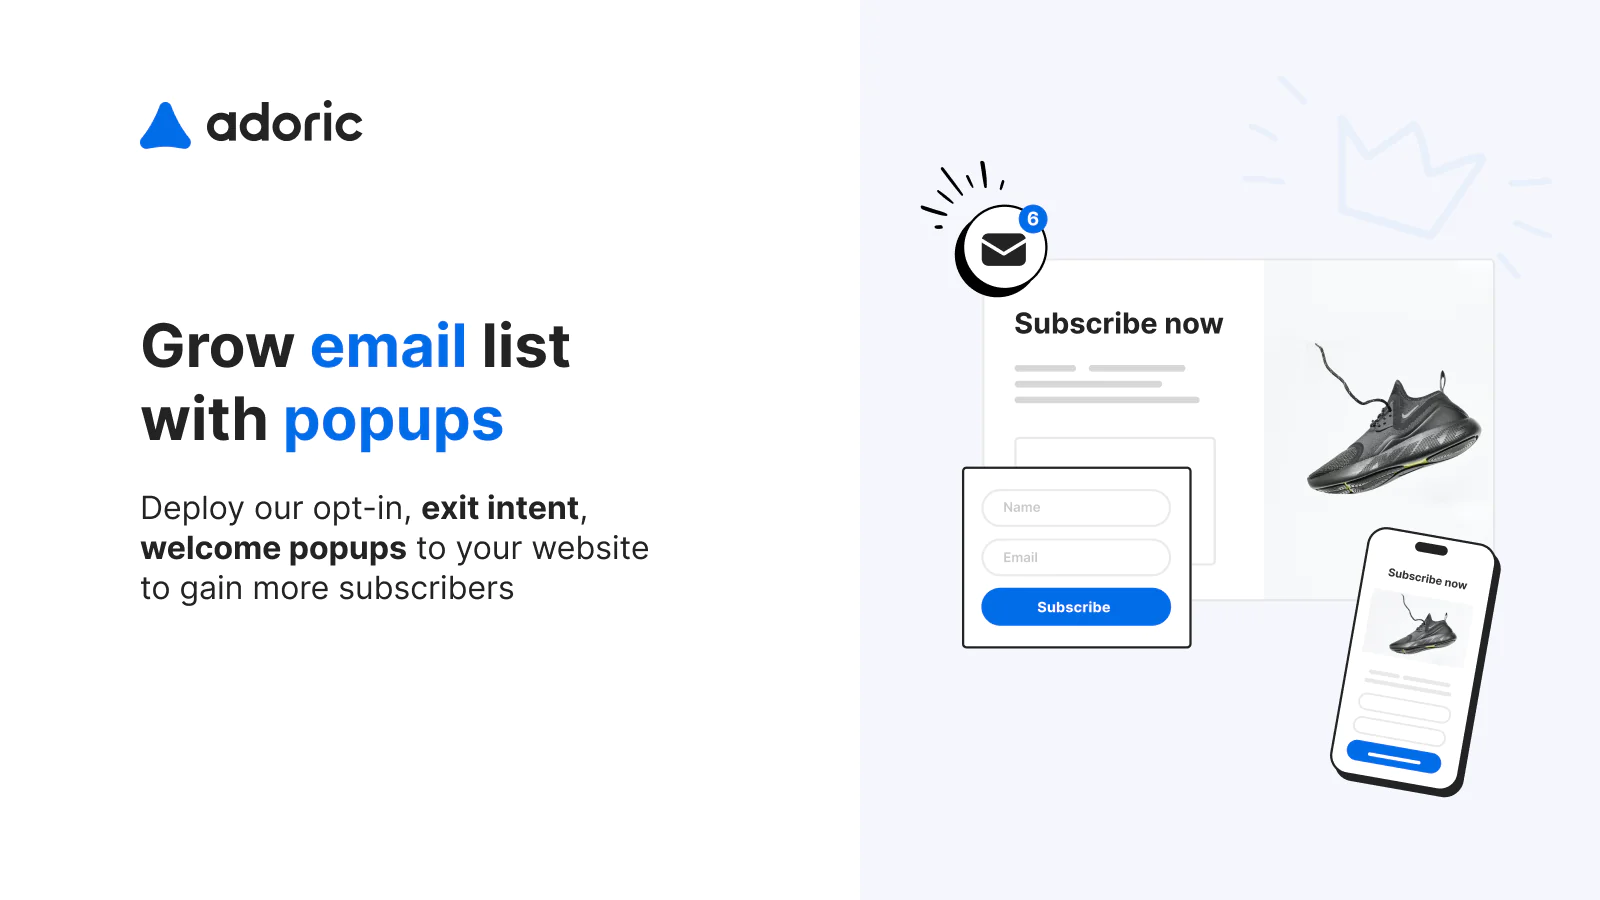 adoric-upsell-and-email-pop-ups-email-popups